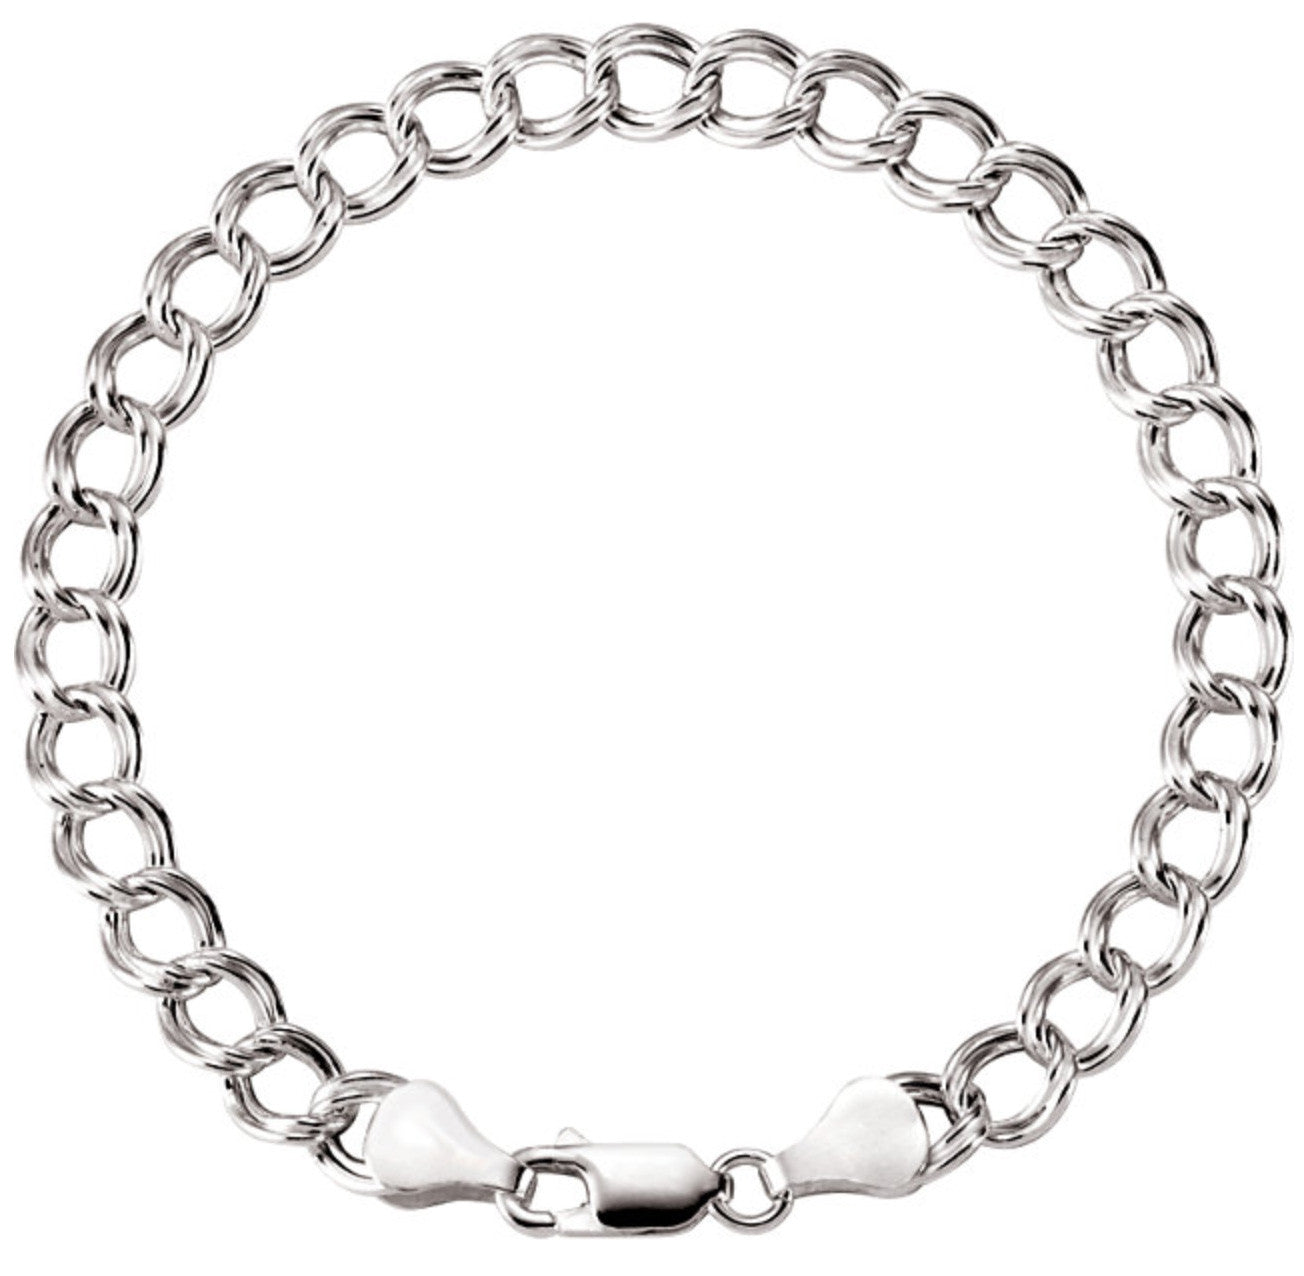 Buy Fashion Frill Stylish Silver chain For Men Boys Stainless Steel Silver  Charm Bracelet For Men Boys Mens Jewellery Combo at Amazon.in